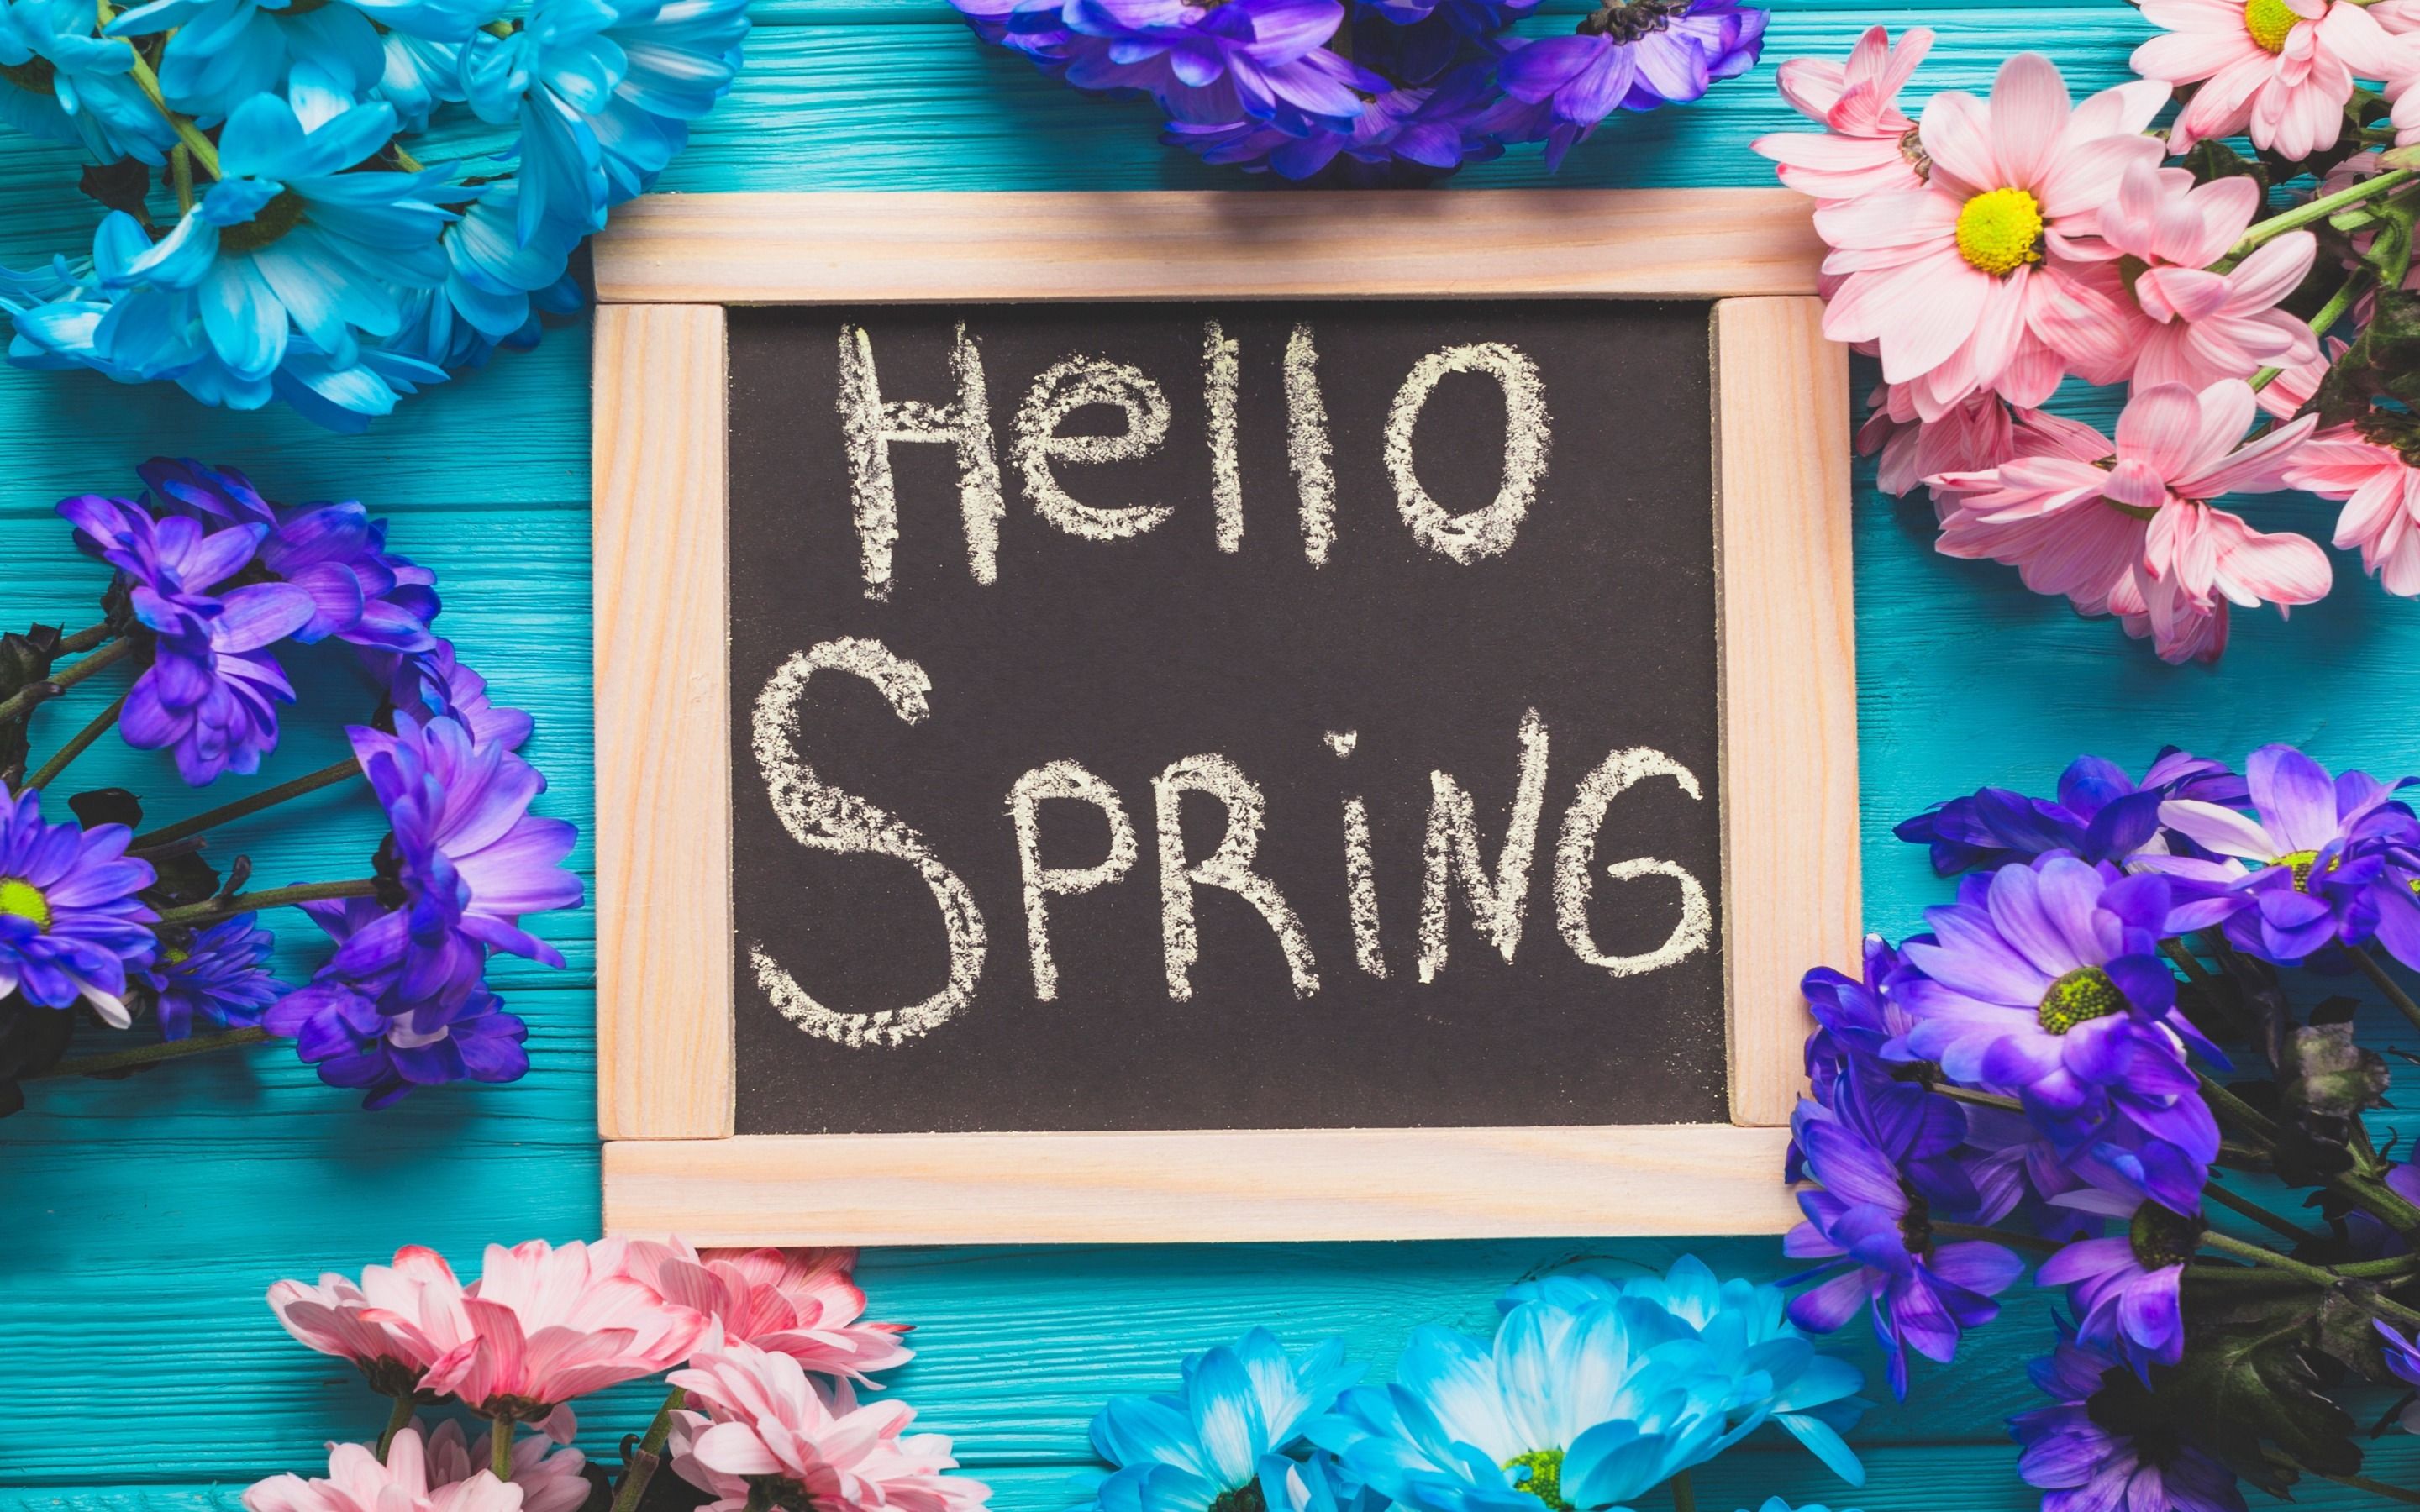 Download wallpaper Hello spring, spring flowers, season, spring concepts, blue wood background for desktop with resolution 2880x1800. High Quality HD picture wallpaper